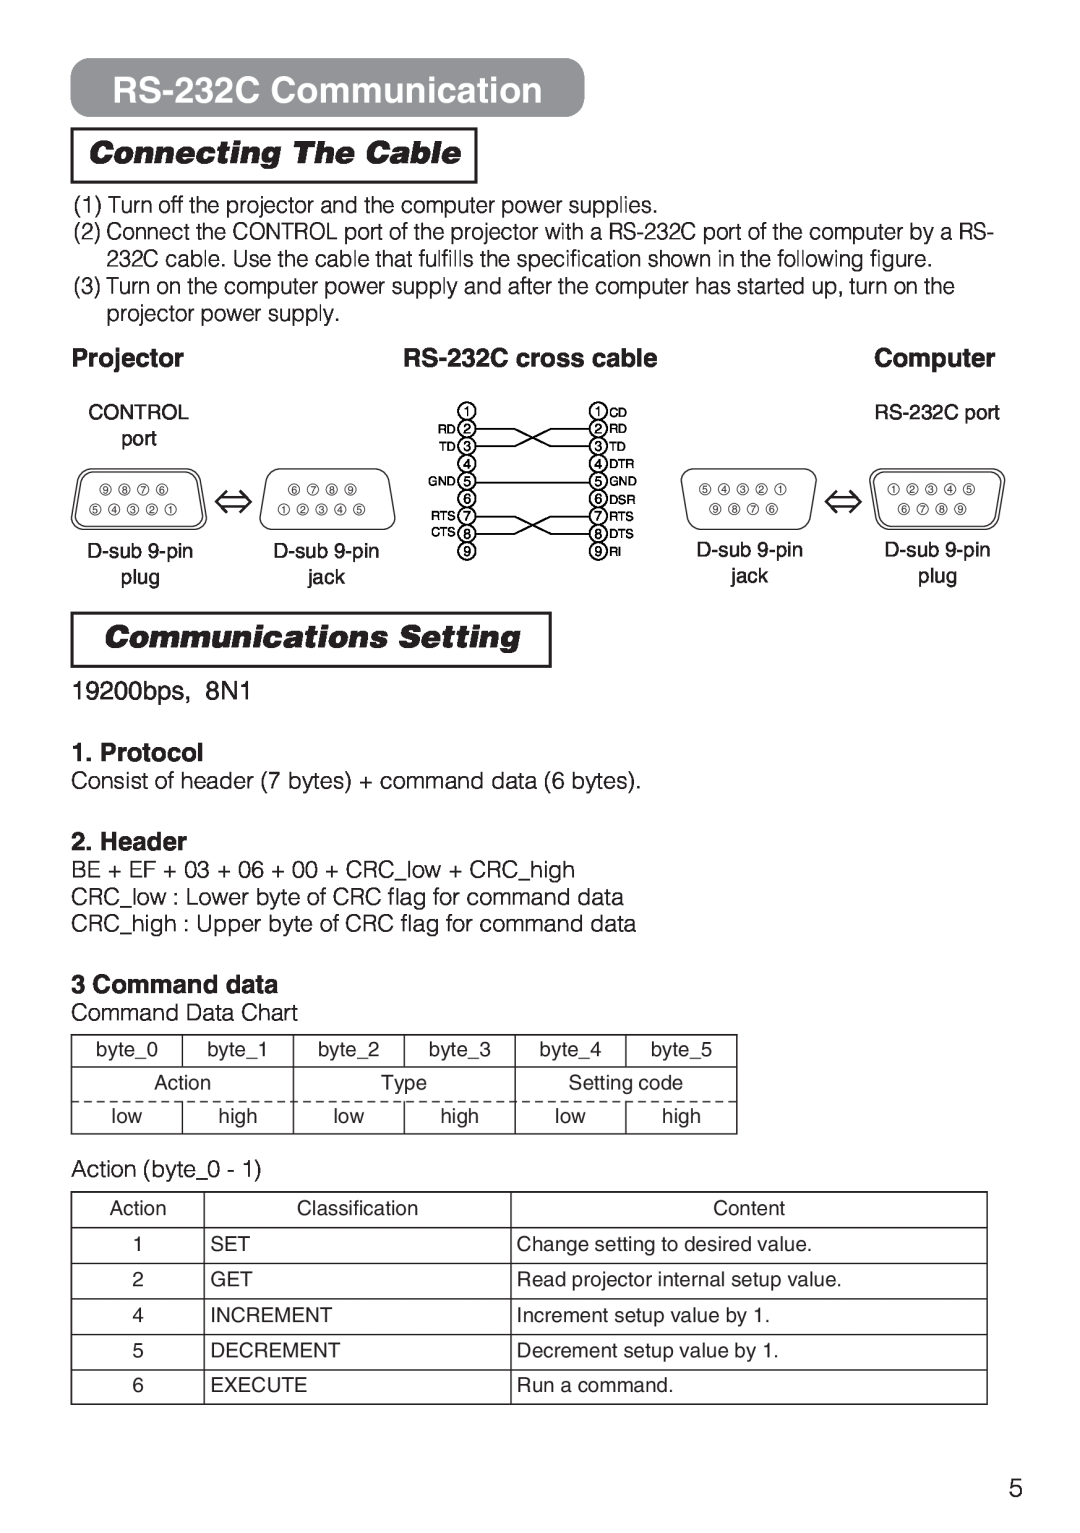 Hitachi CP-S210 RS-232CCommunication, Connecting The Cable, Communications Setting, RS-232Ccross cable, Computer, Protocol 